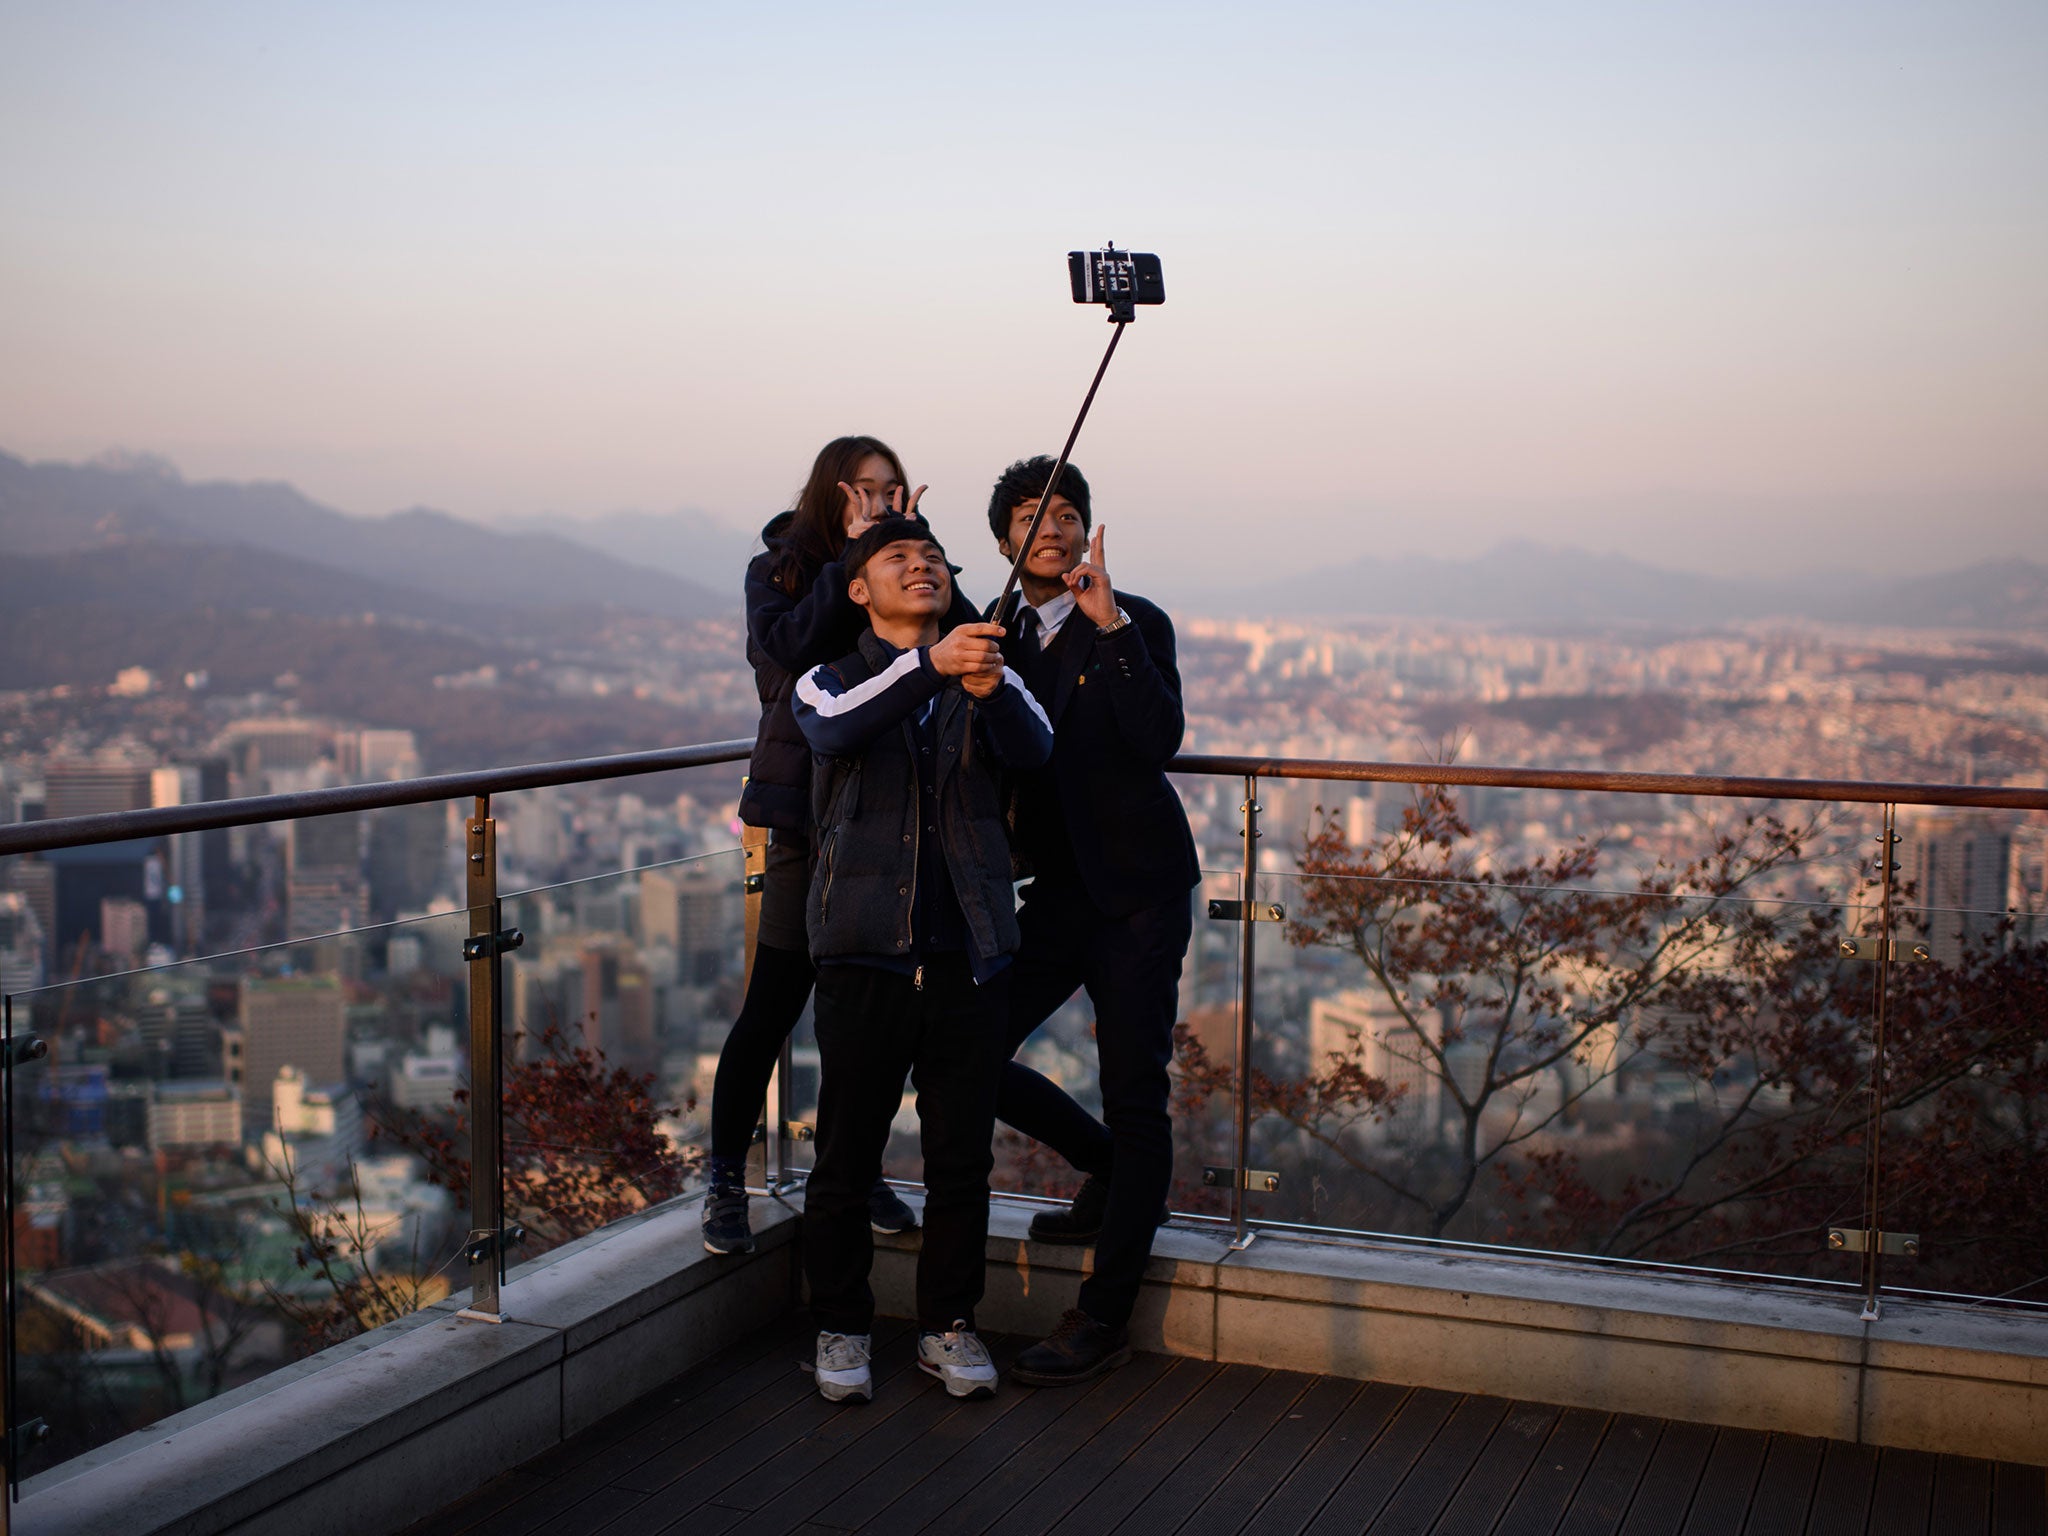 People use a 'selfie stick' to take a group photo overlooking the city skyline of Seoul